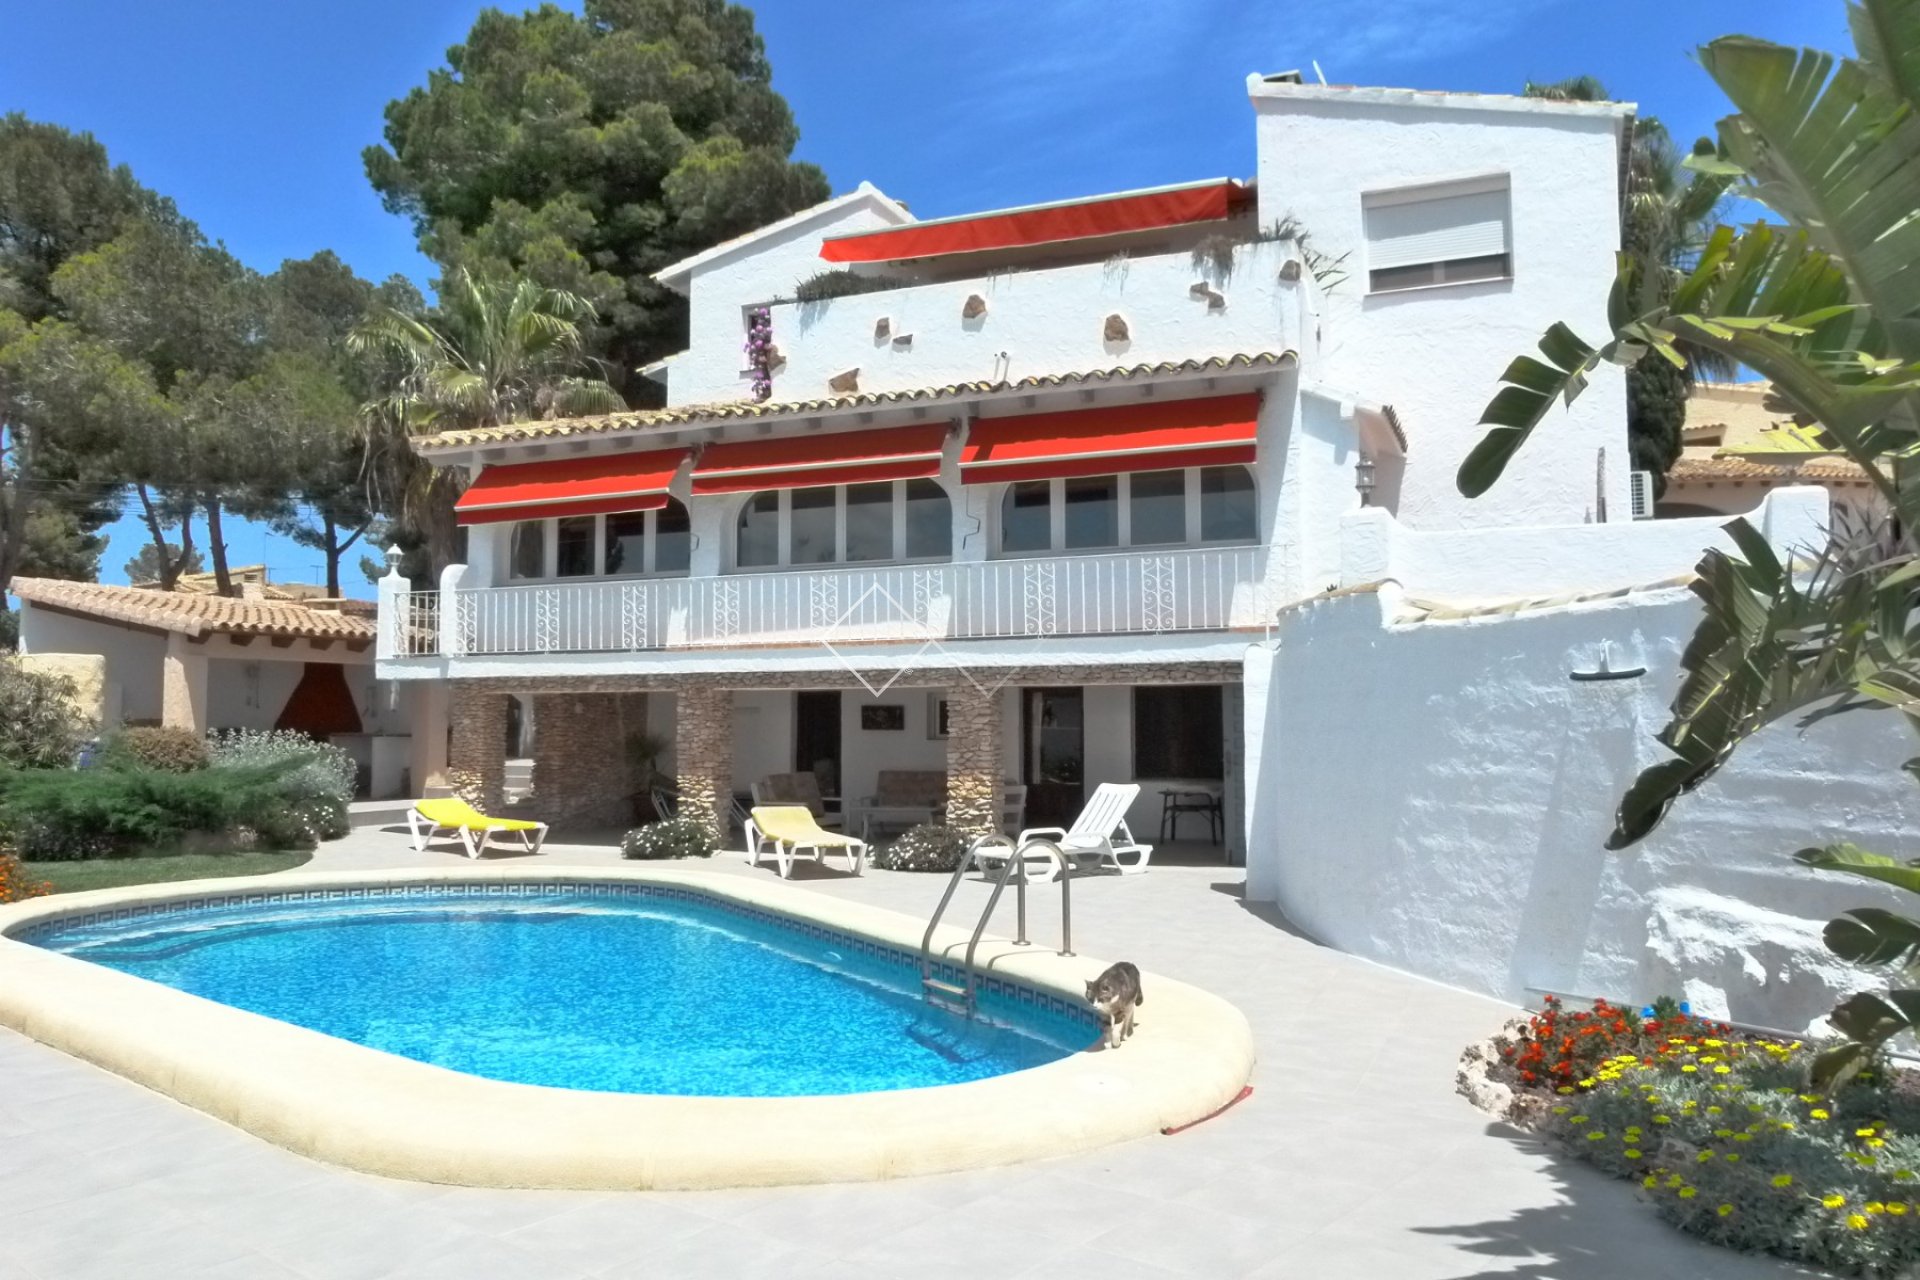  Villa for sale Moraira, only 300 m from the beach Pla del Mar